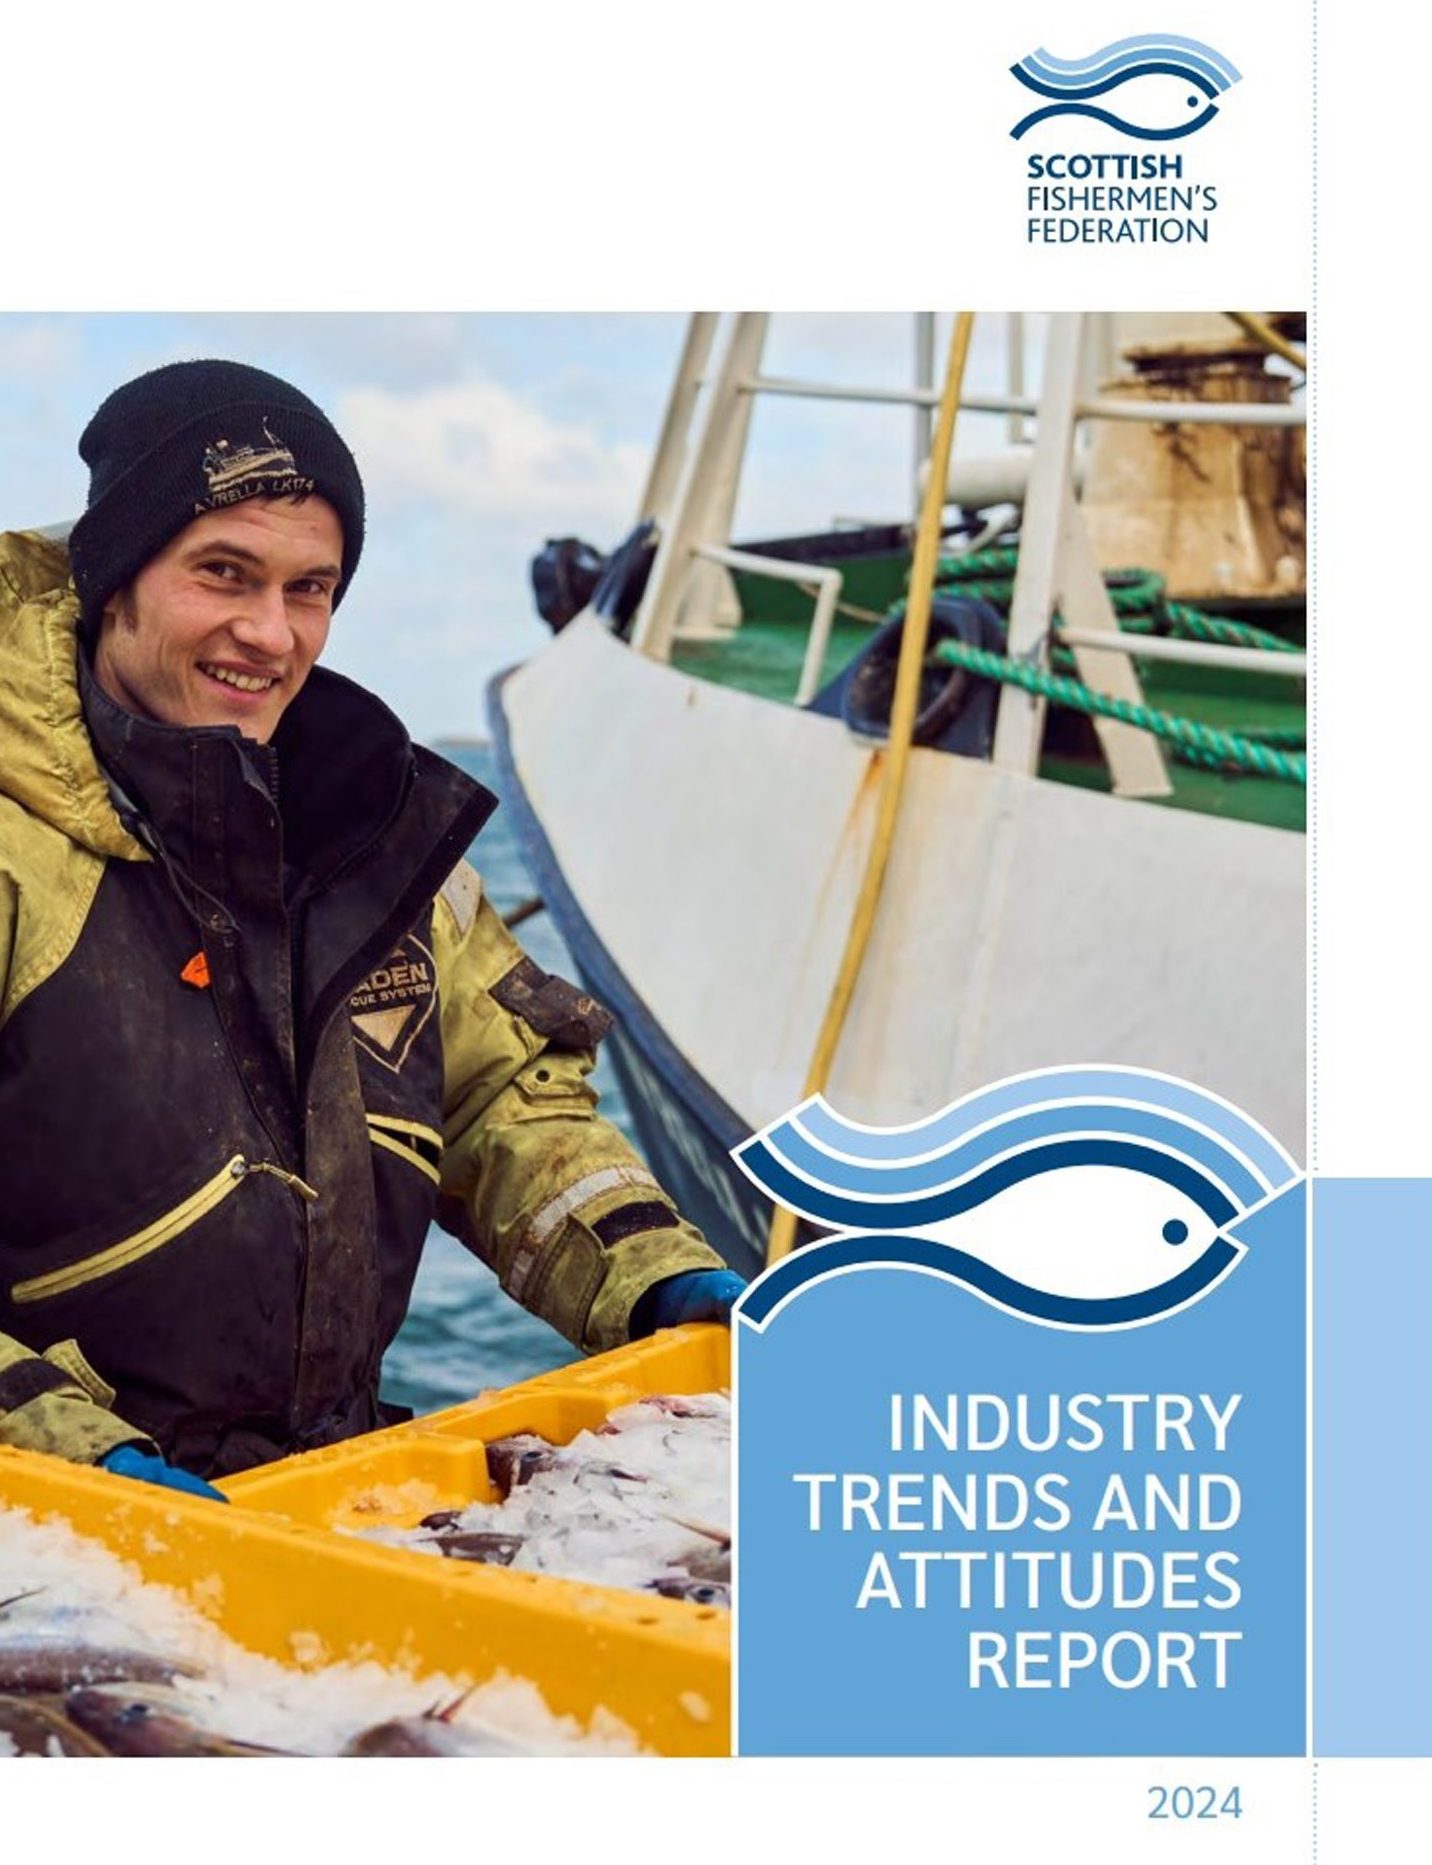 The SFF's first Industry Trends and Attitudes Report, out today. 